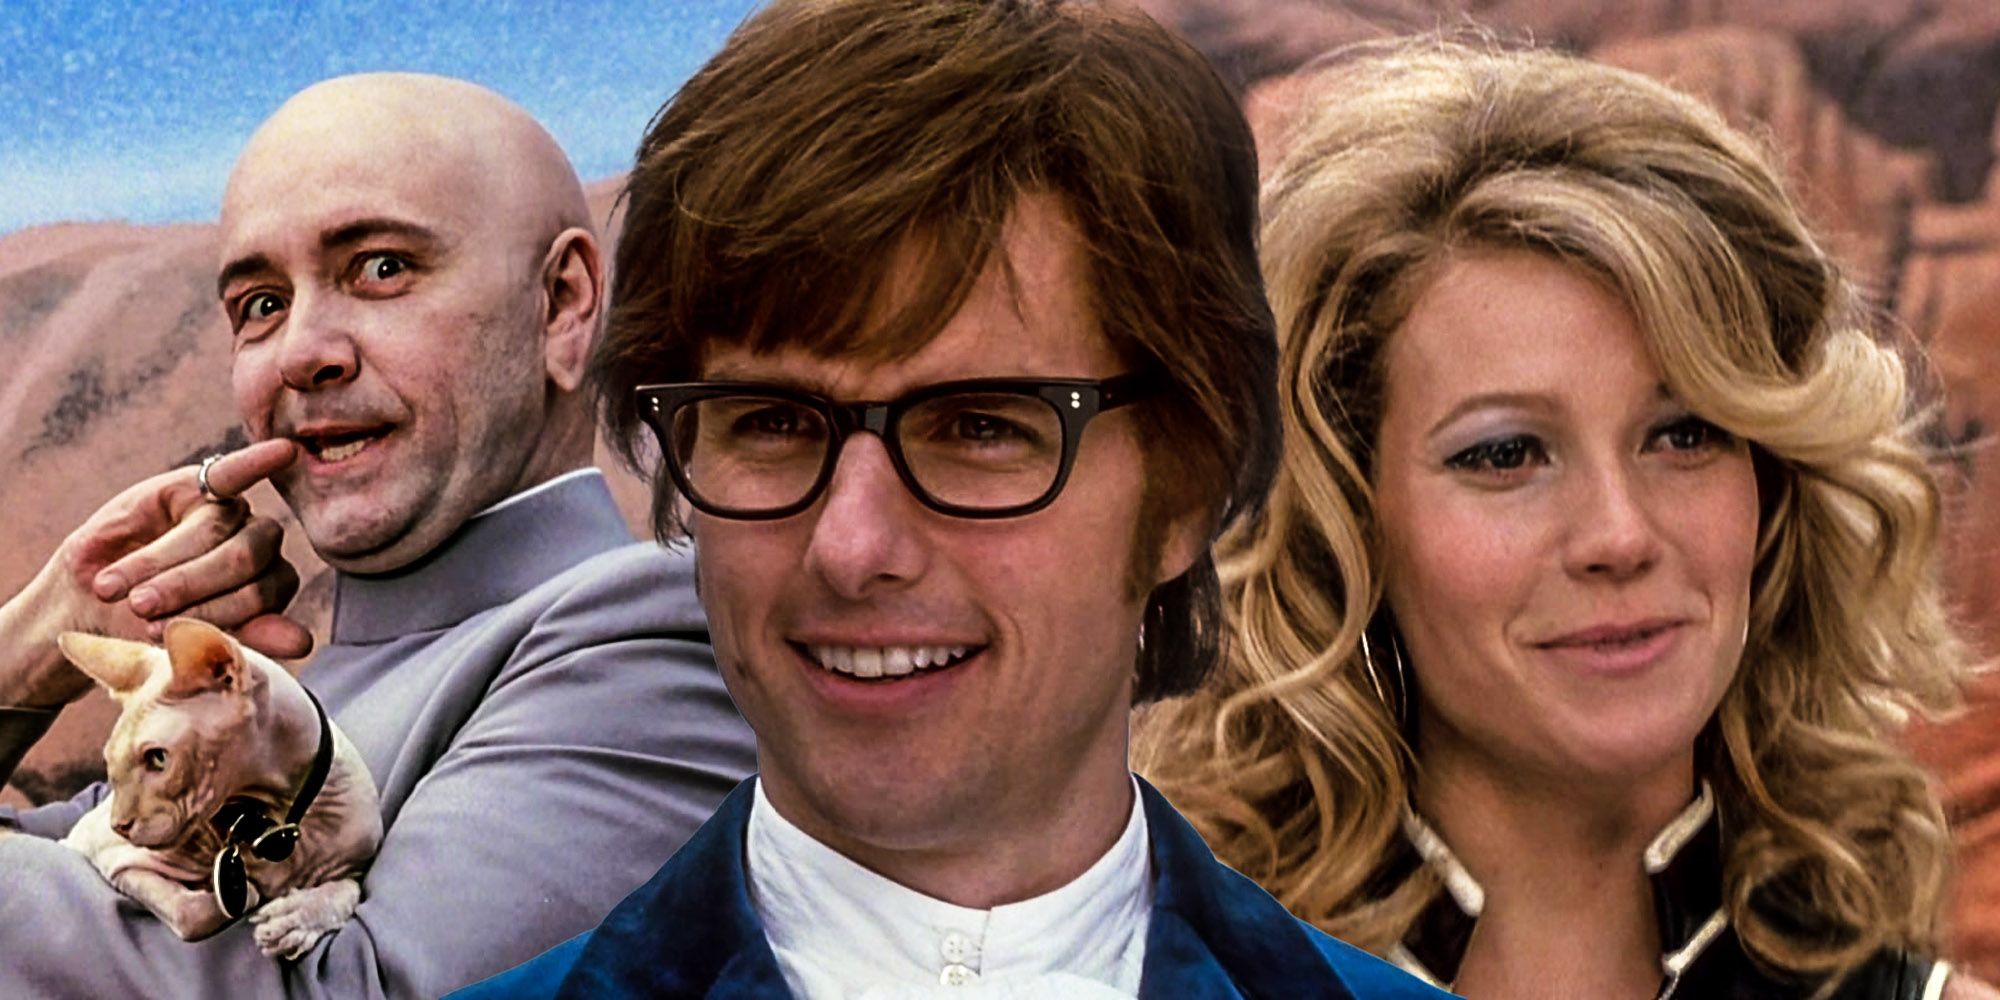 Austin Powers in Goldmember Tom Cruise Kevin Spacey Gwyneth Paltrow